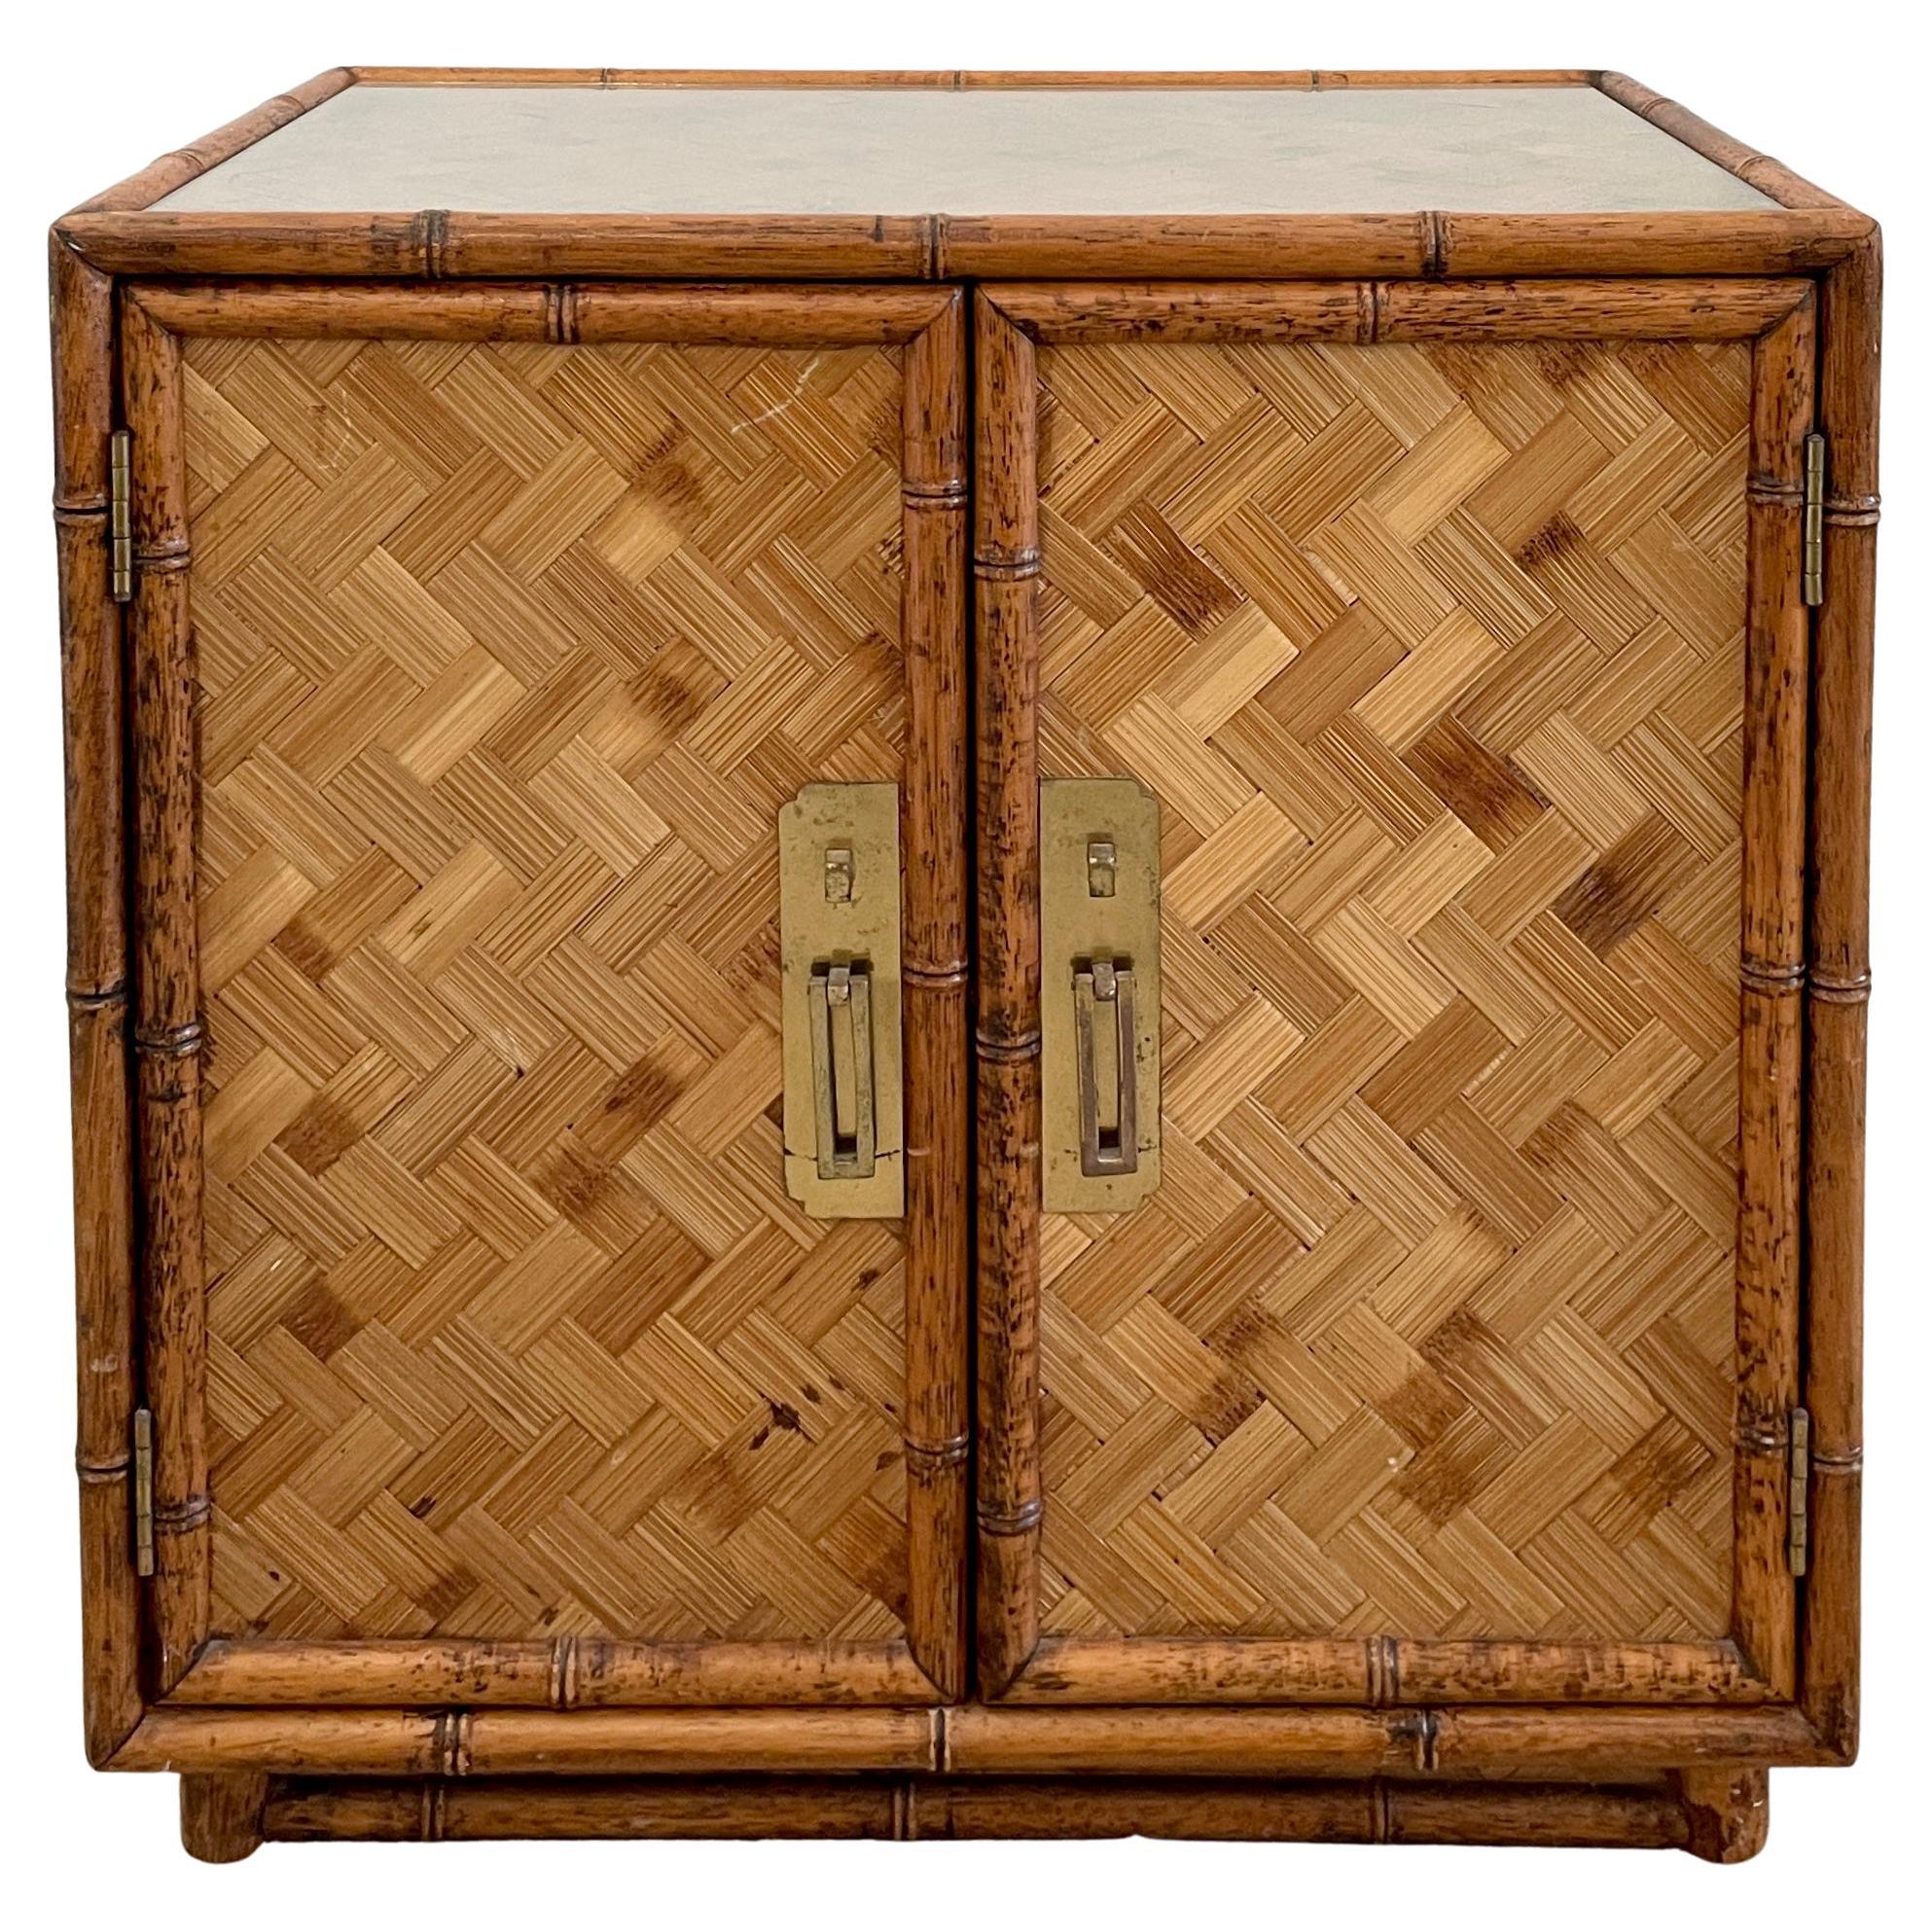 Boho Chic Bamboo Side Table Two-Door Cabinet with Glass Top